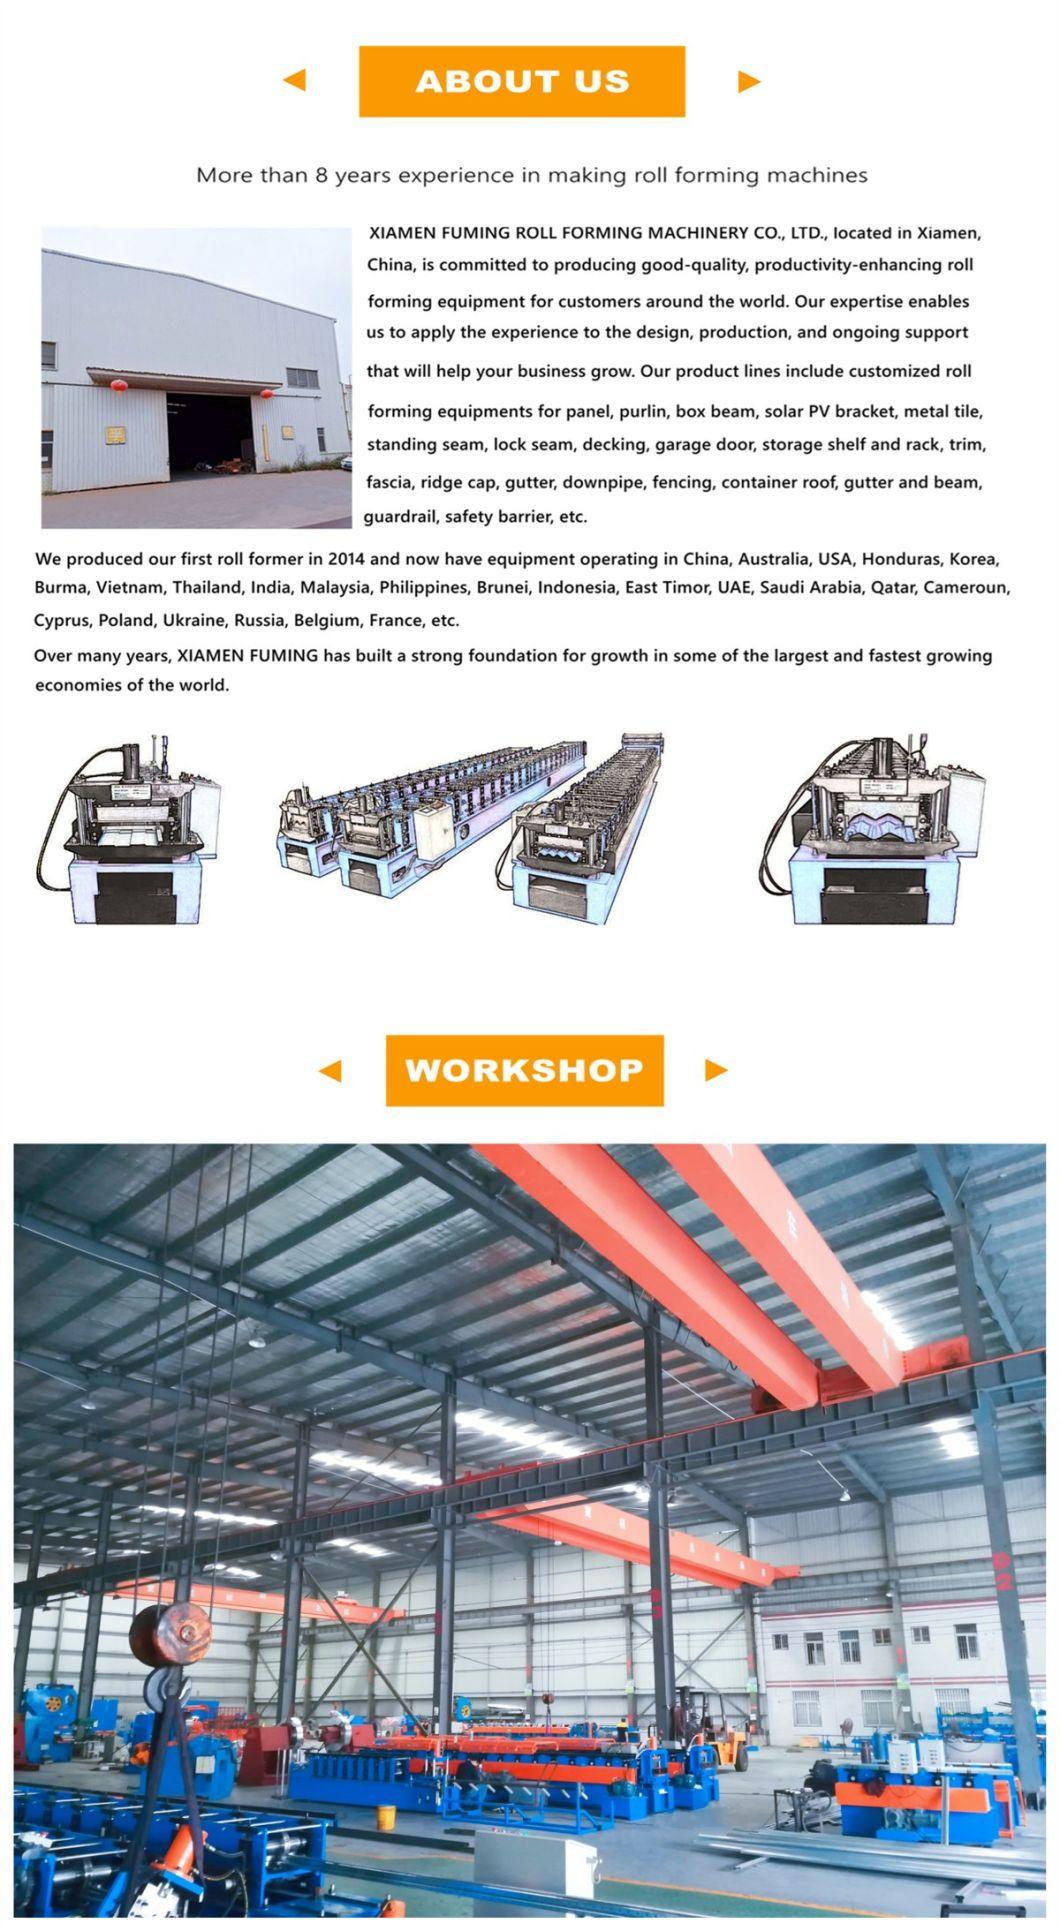 Customized Gi, PPGI, Stainless Steel, Hot Rolled Steel Metal Roof Forming Machine Roller Former